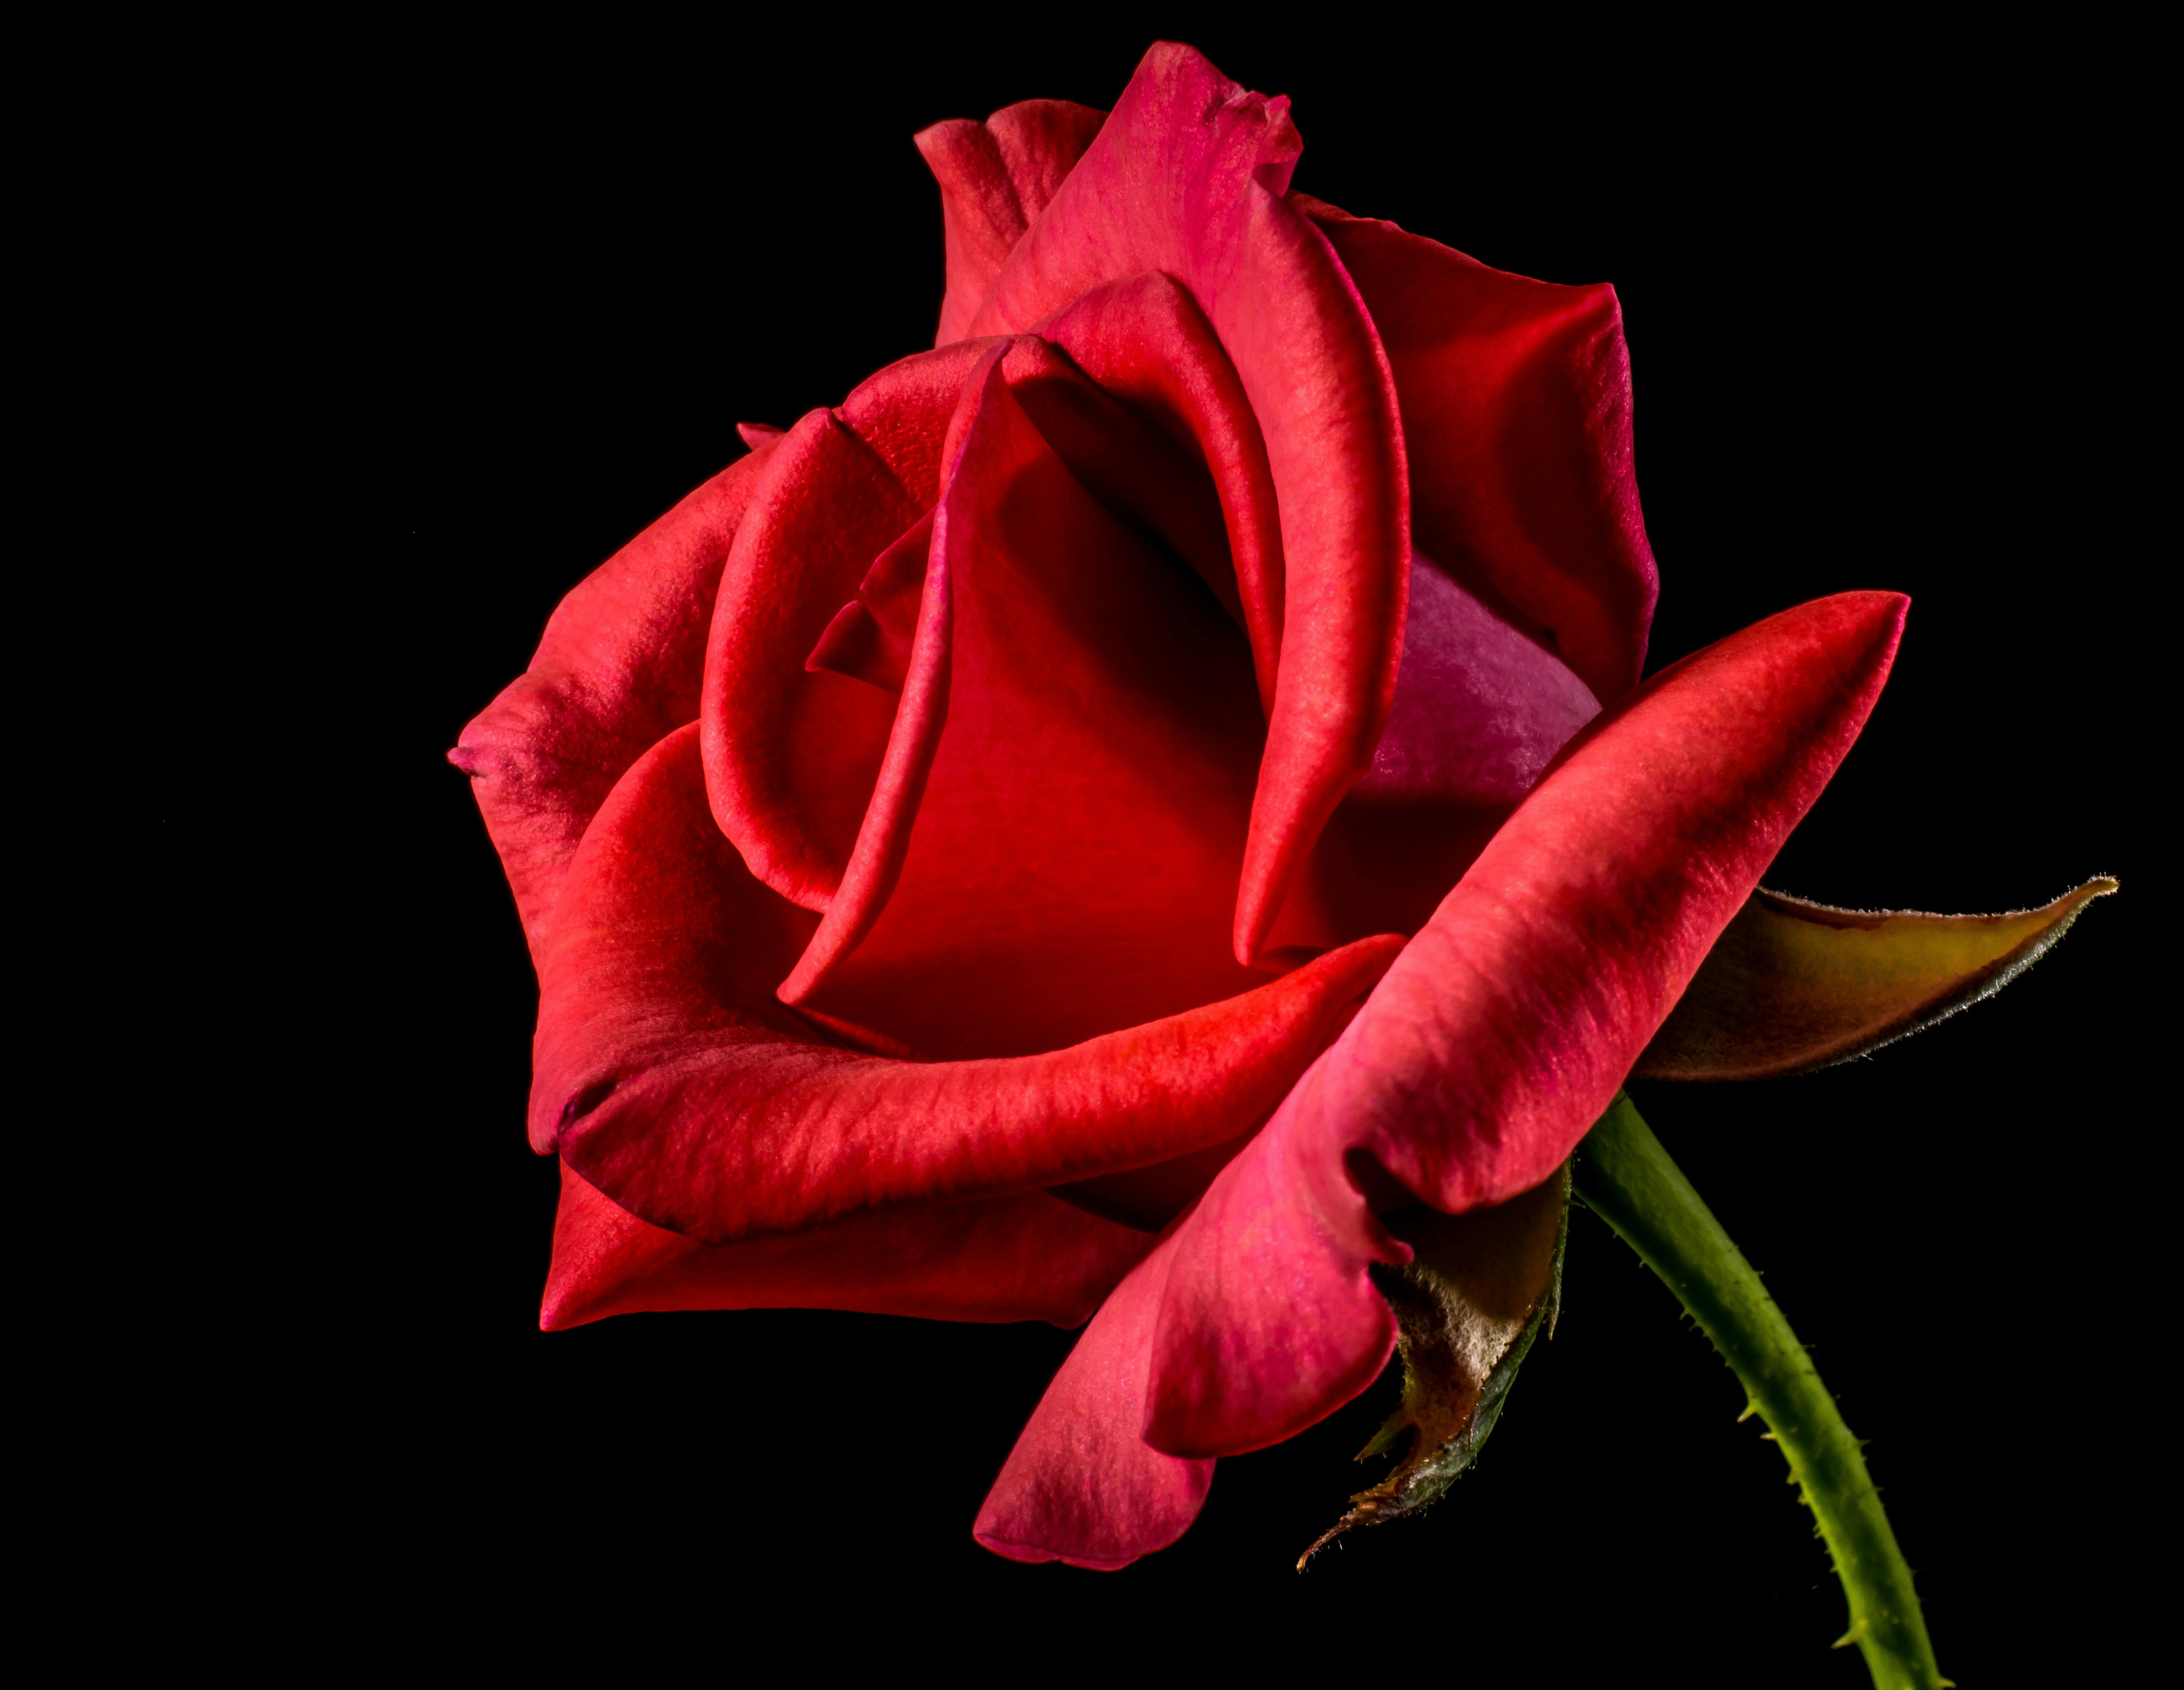 Shallow Focus Photography of Red Rose · Free Stock Photo - 5168 x 4000 jpeg 1384kB